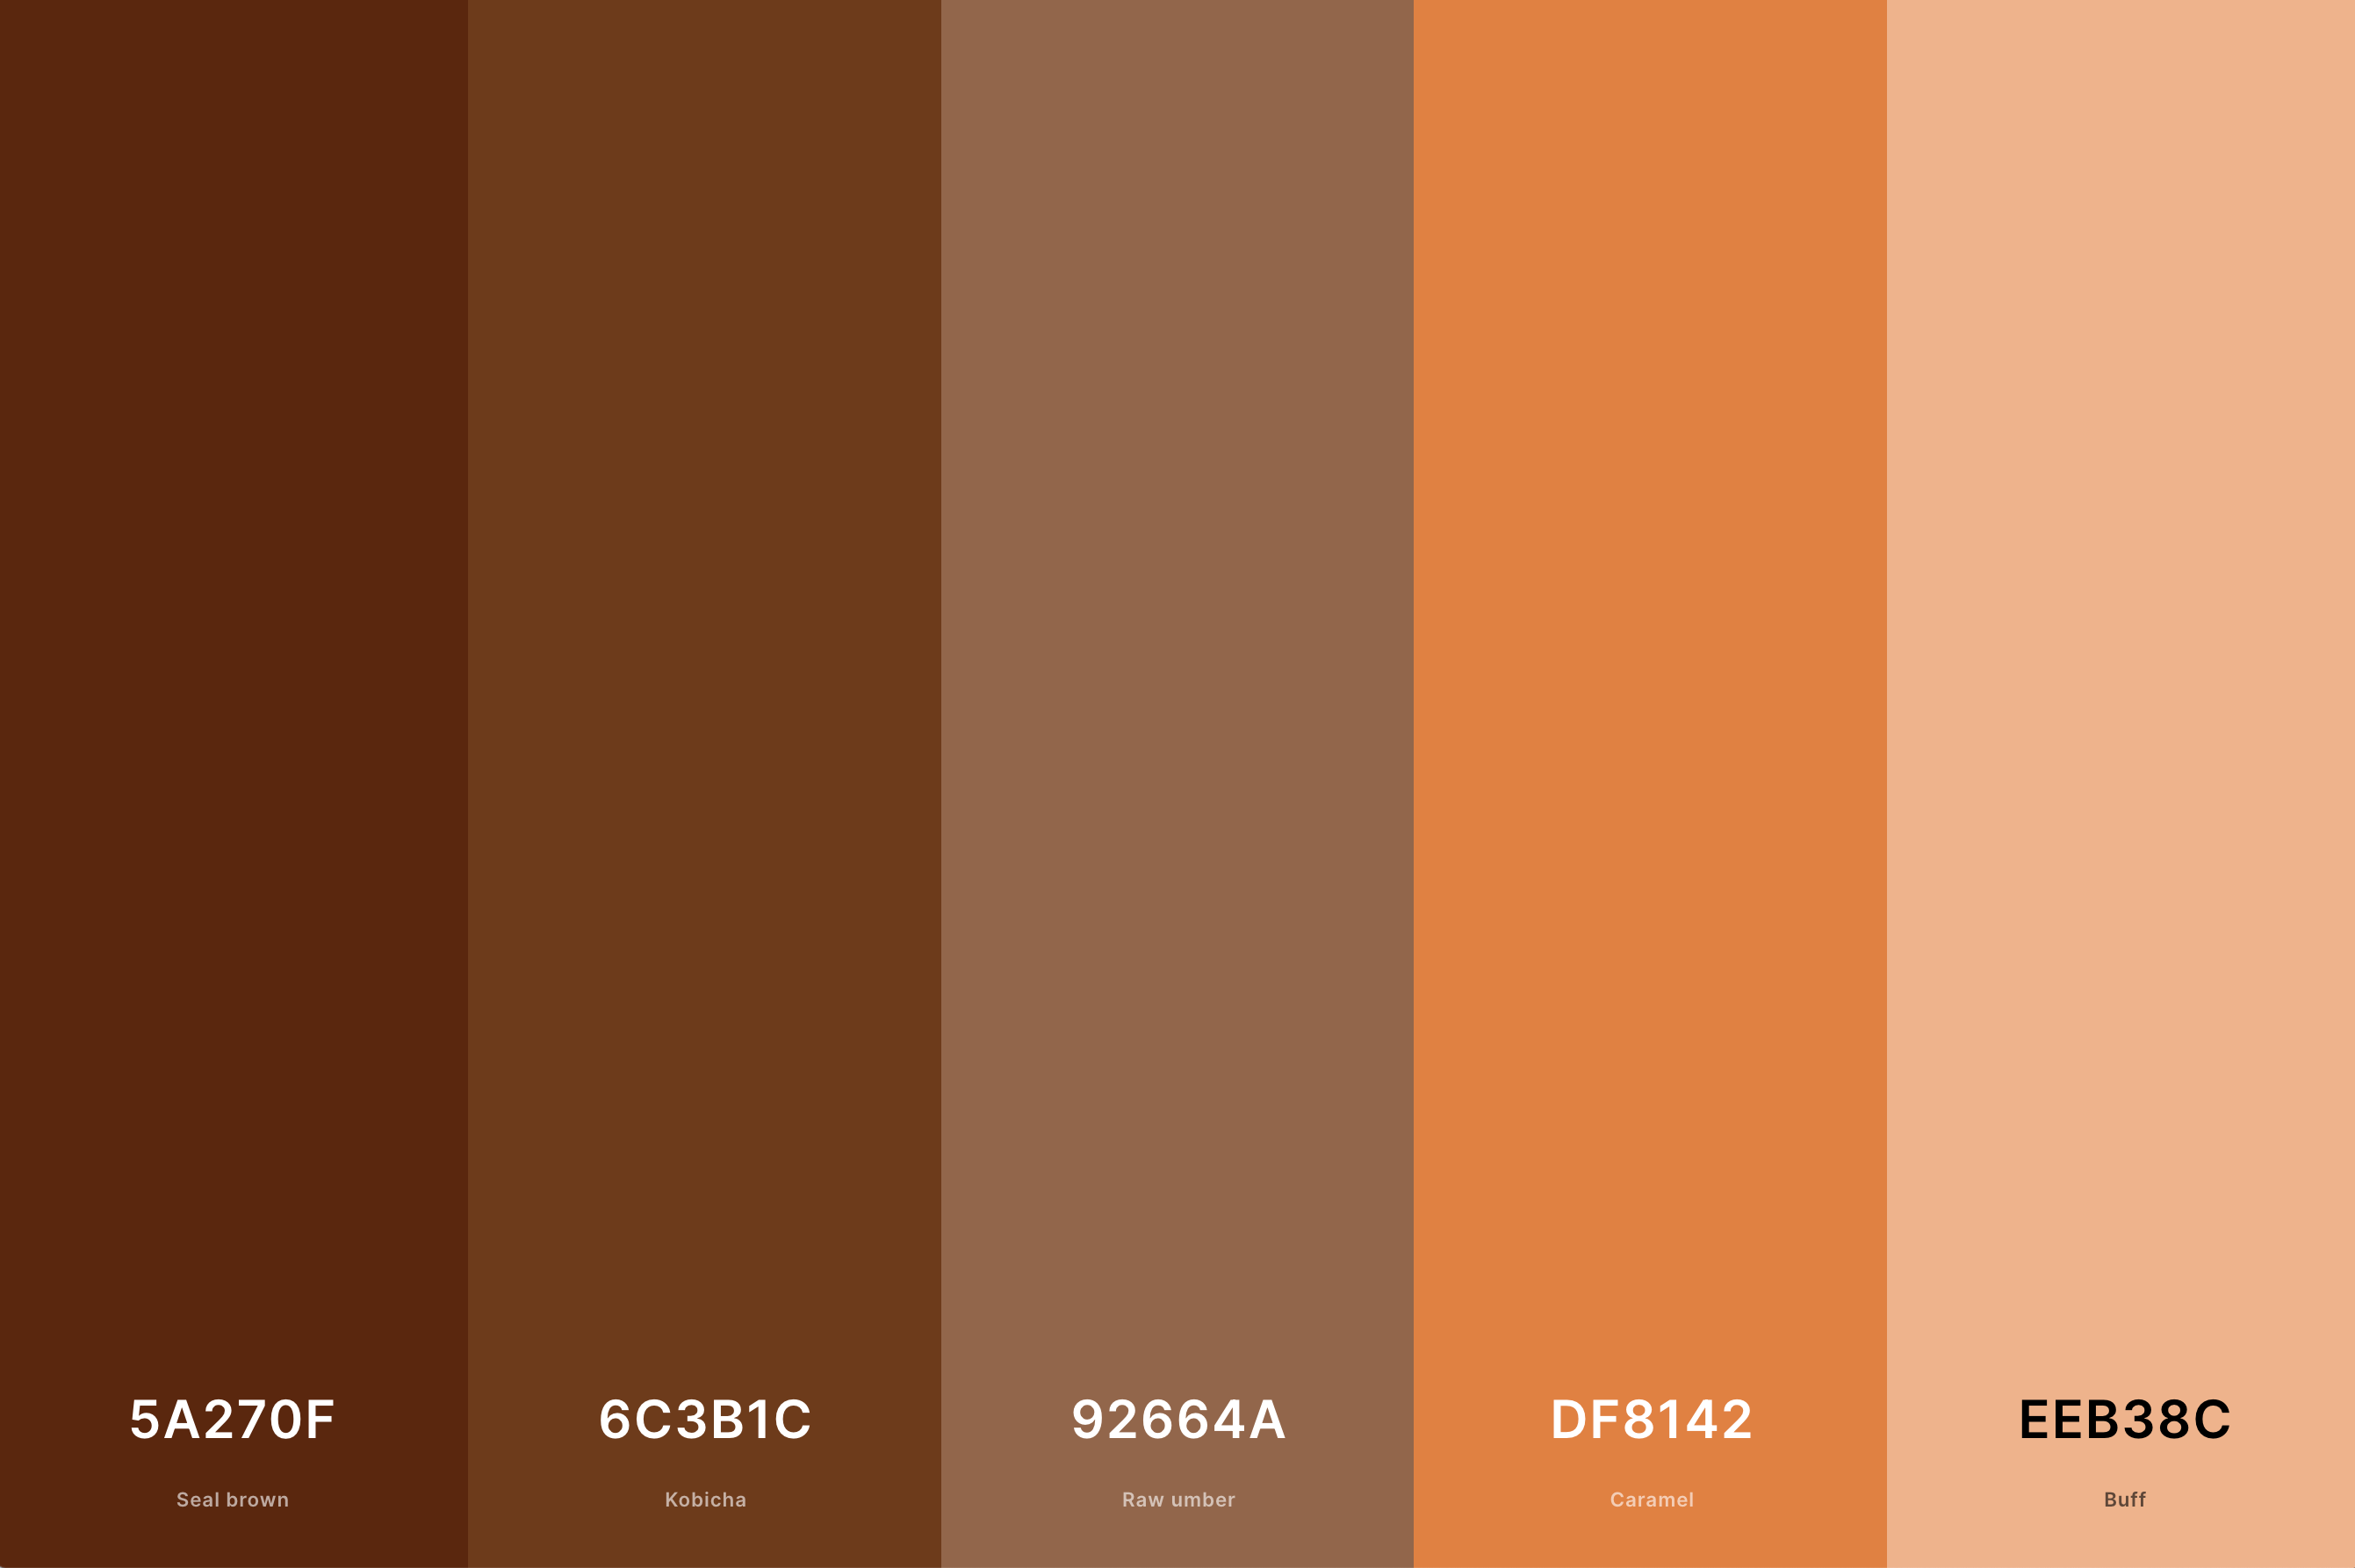 Brown & Orange Color Palette Color Palette with Seal Brown (Hex #5A270F) + Kobicha (Hex #6C3B1C) + Raw Umber (Hex #92664A) + Caramel (Hex #DF8142) + Buff (Hex #EEB38C) Color Palette with Hex Codes